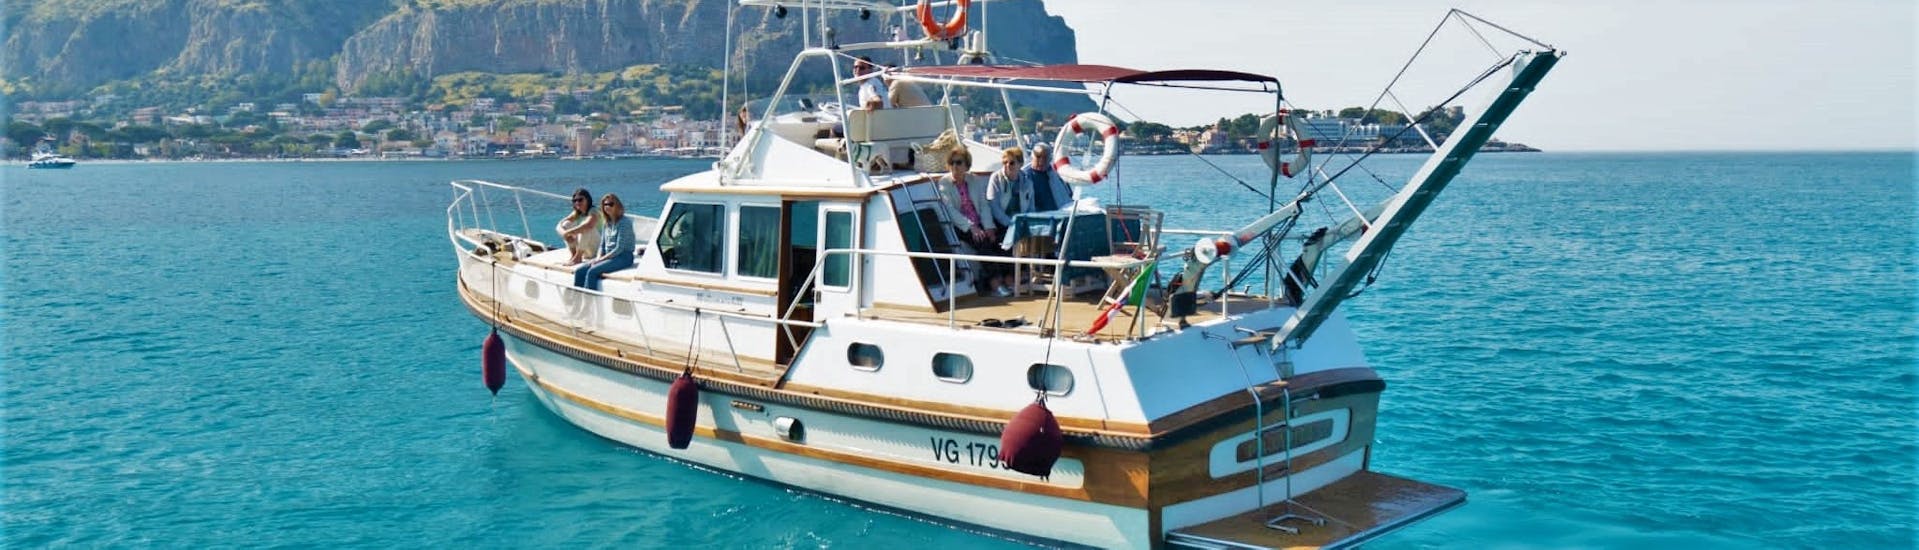 The boat used by Seica Boat during the boat trip from Palermo to Mondello Beach with apéritif.